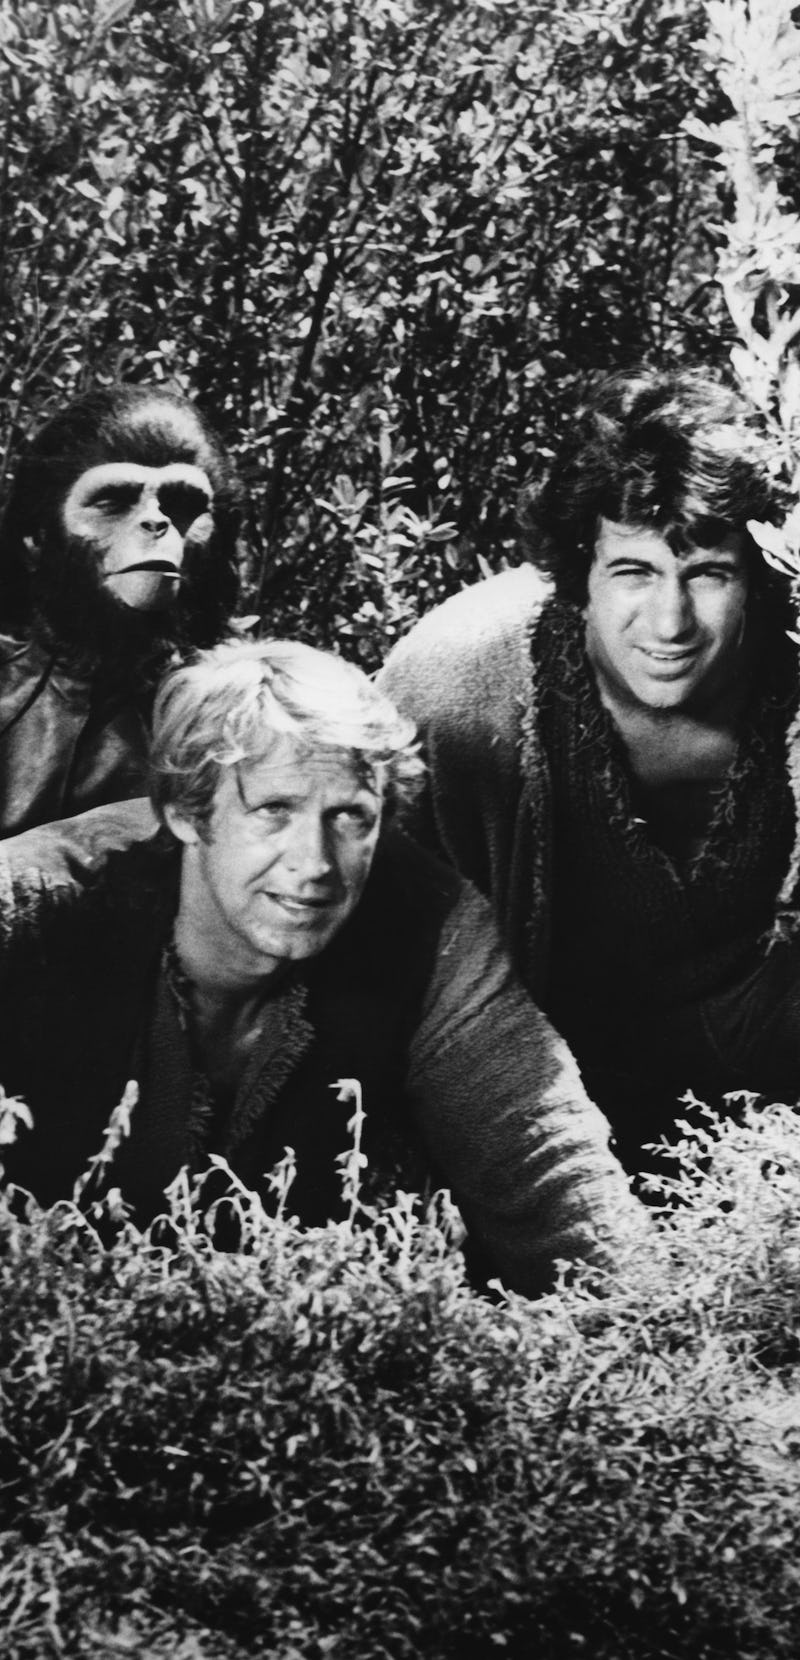 From left to right, actors Roddy McDowall as Galen, Ron Harper as Alan Virdon, and James Naughton as...